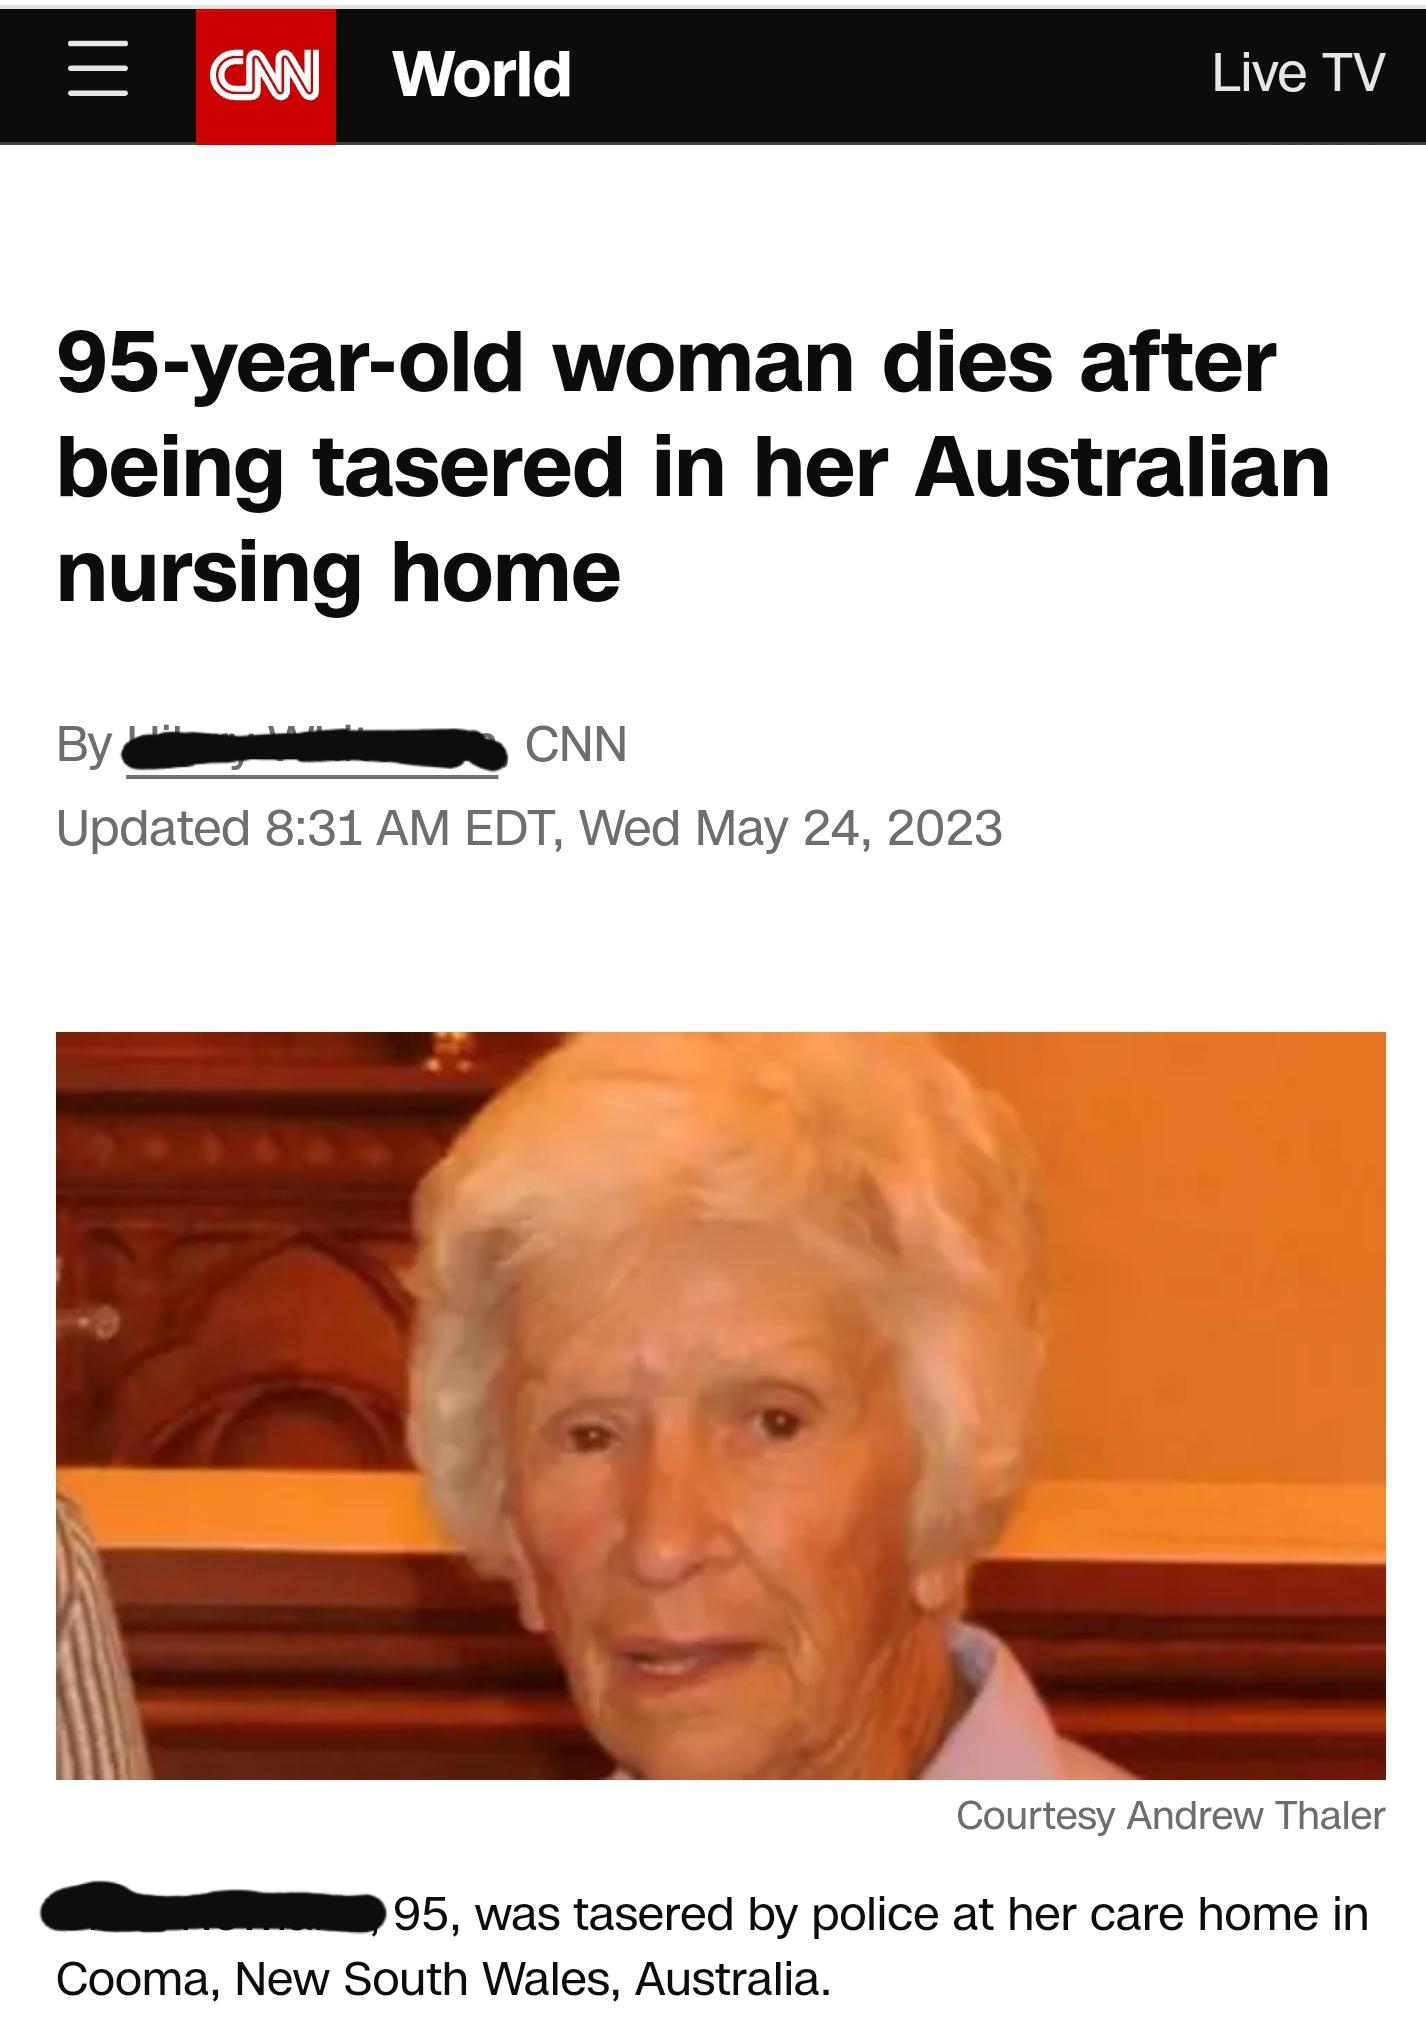 trashy people - head - Cann Cnn World 95yearold woman dies after being tasered in her Australian nursing home By Cnn Updated Edt, Wed Live Tv Courtesy Andrew Thaler 95, was tasered by police at her care home in Cooma, New South Wales, Australia.